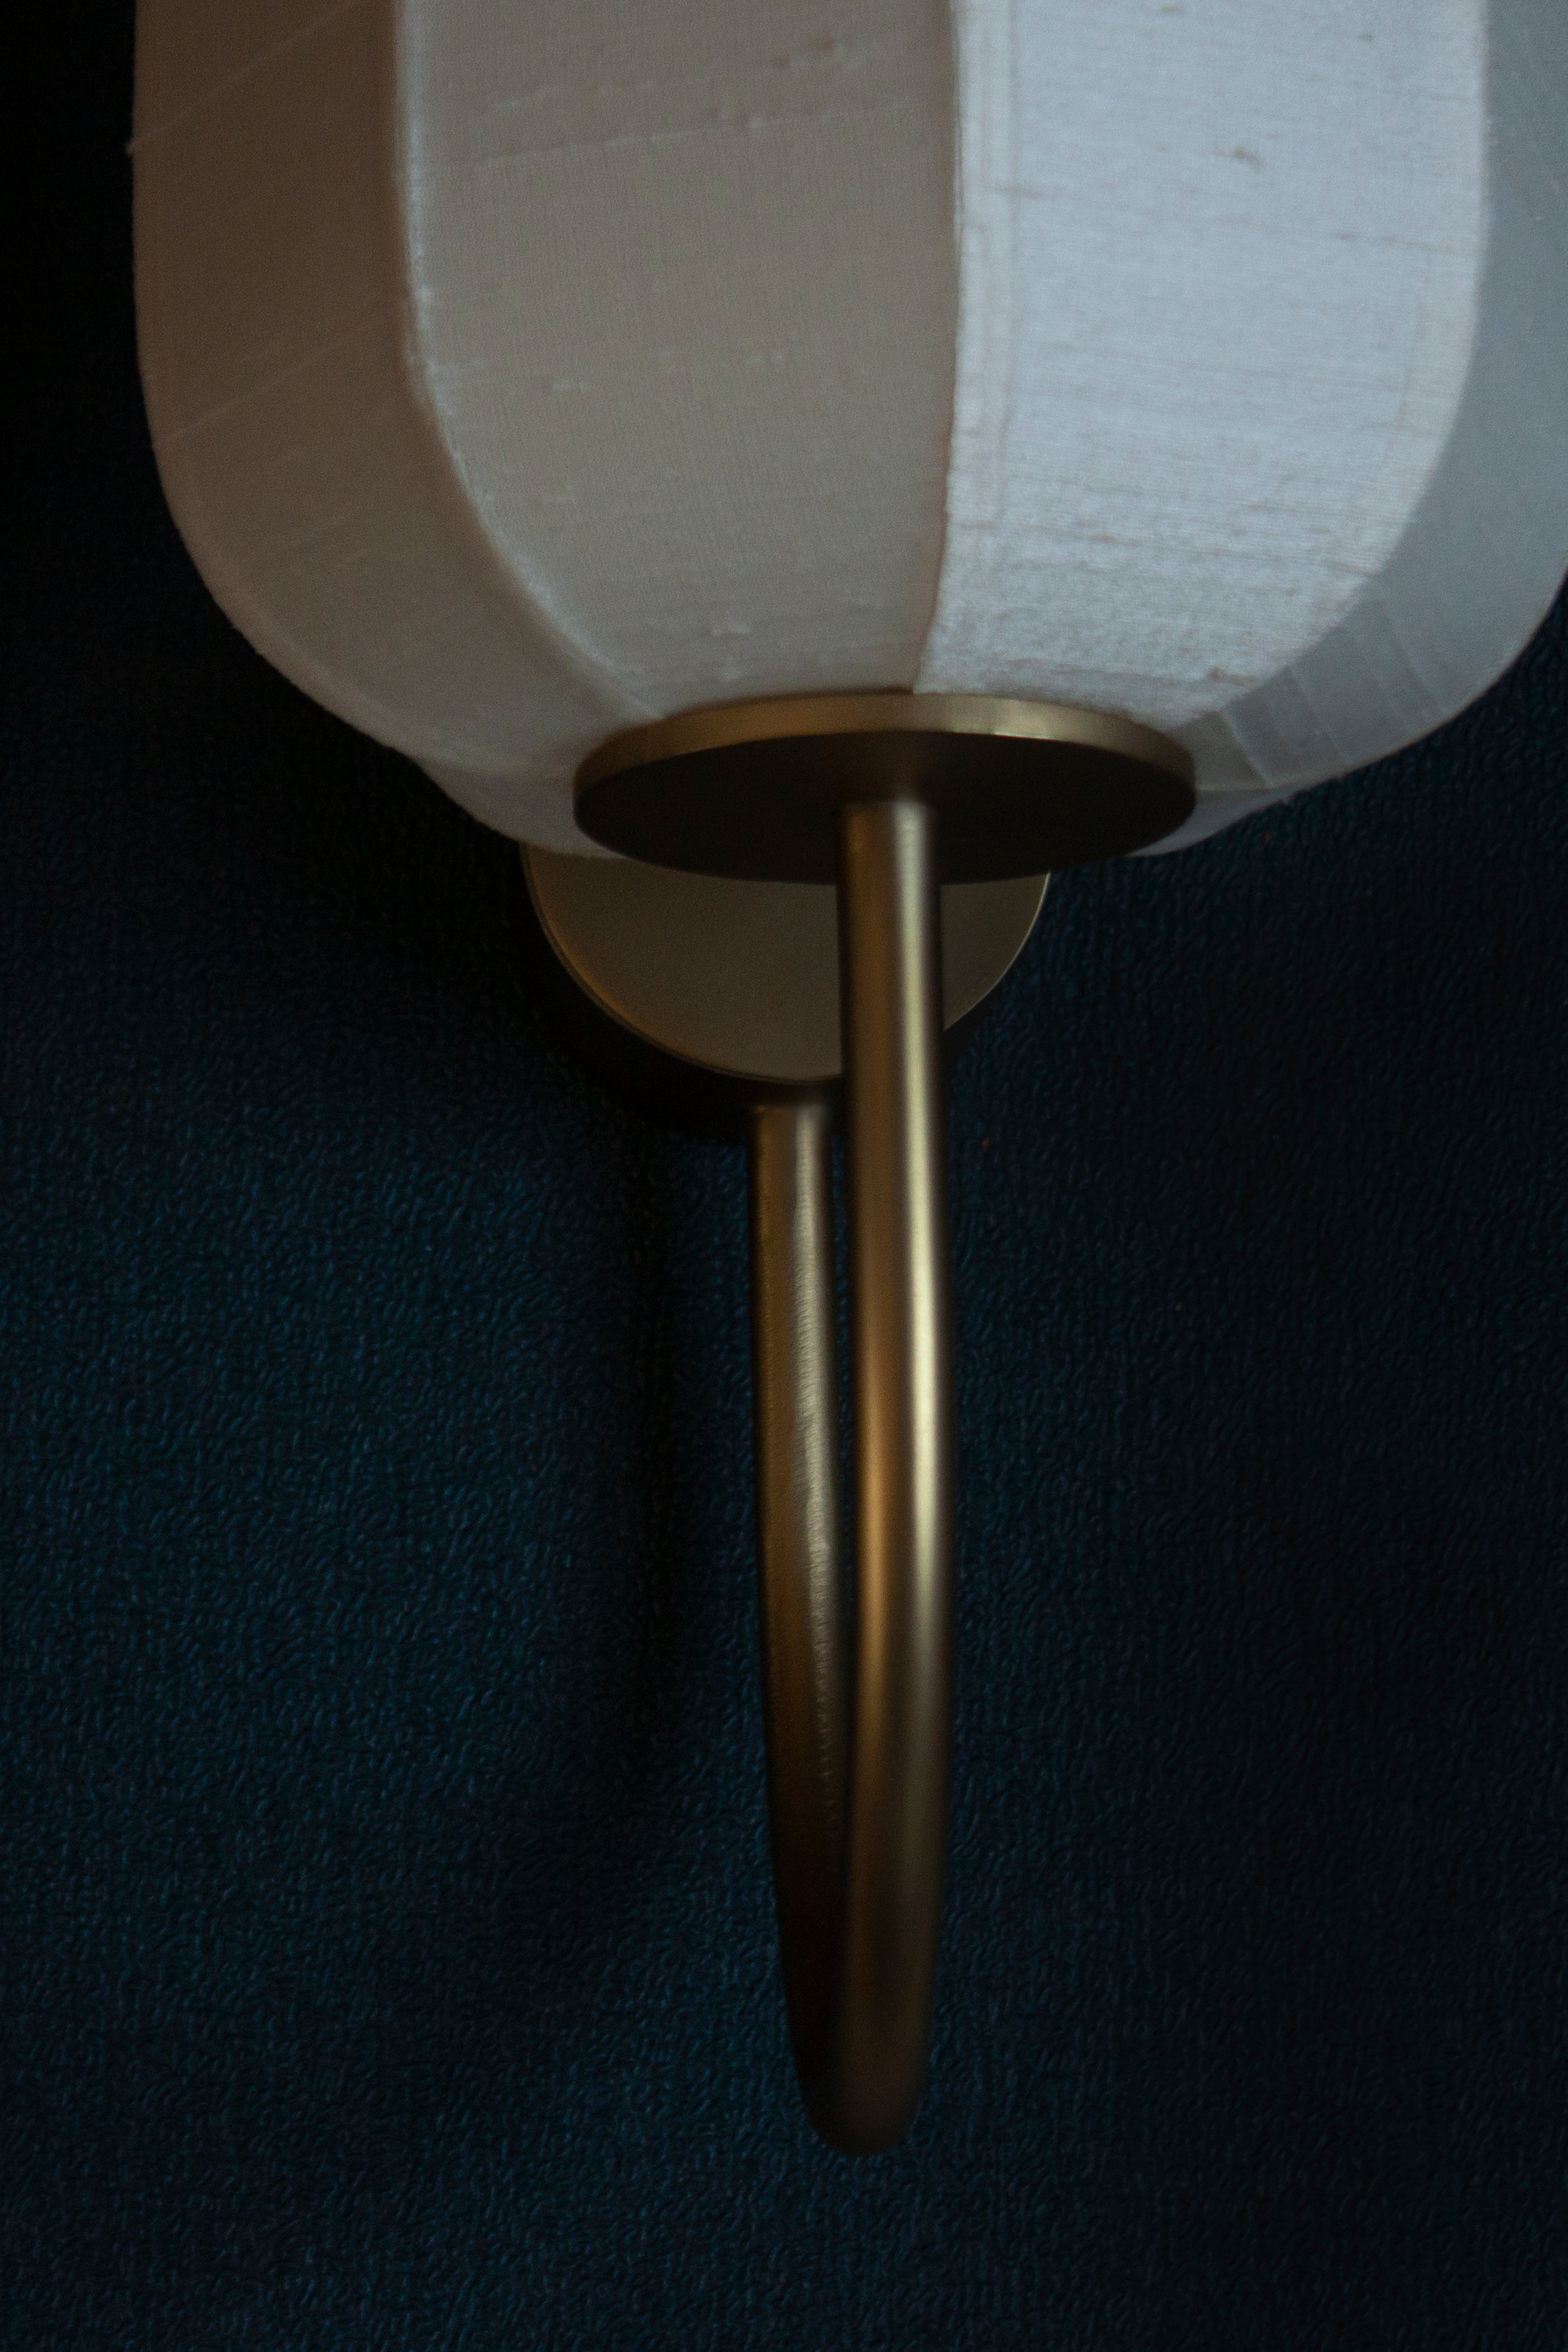 Sage Wall Lamp in stock